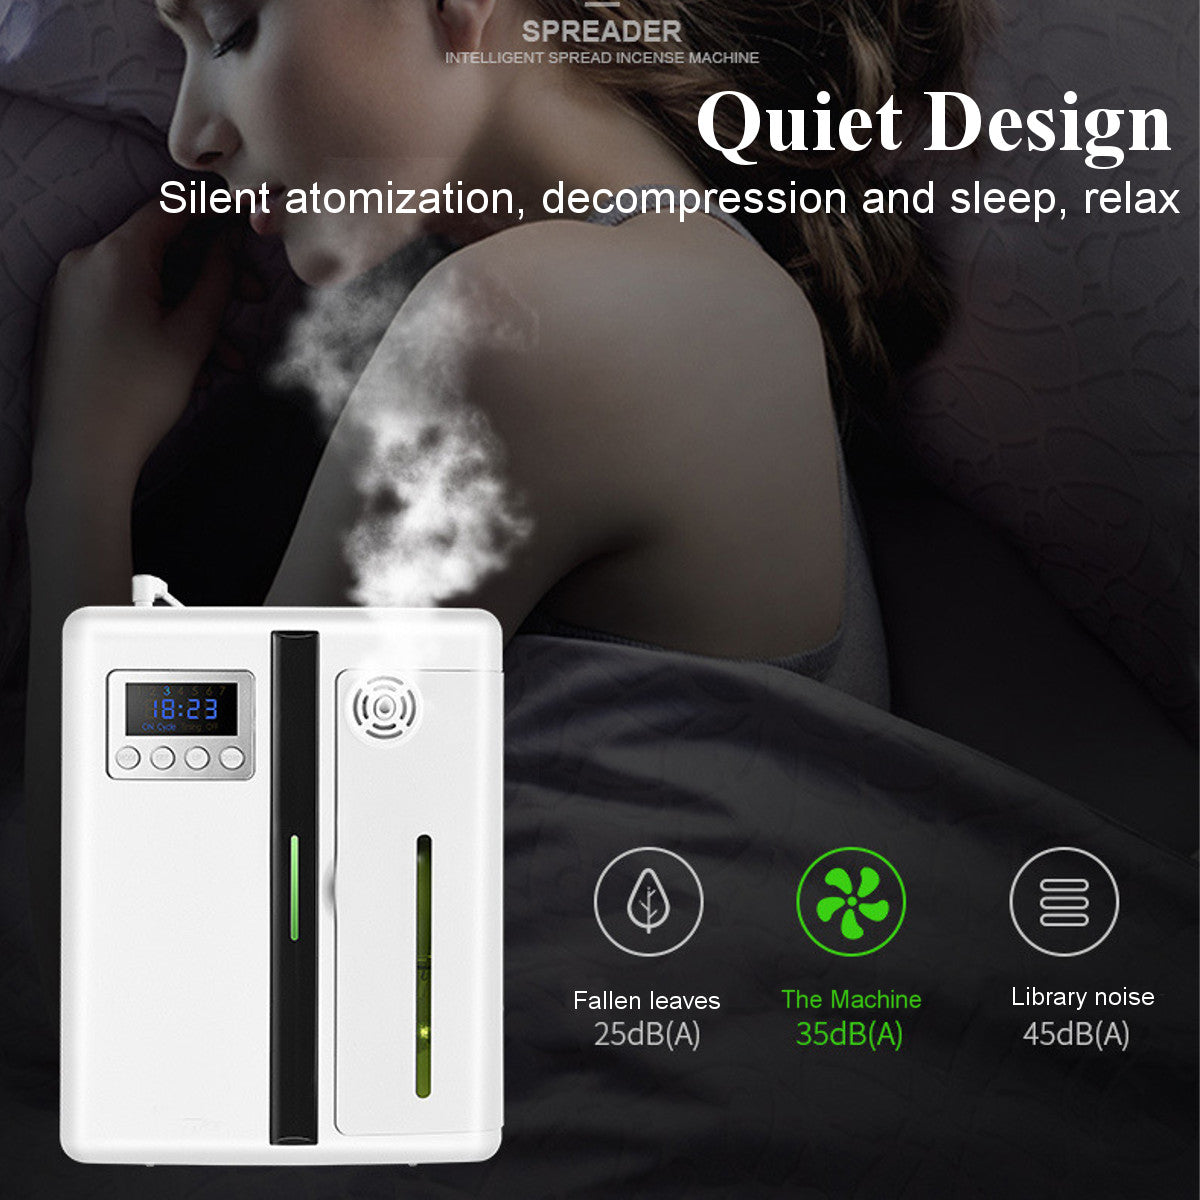 Scent Diffuser 160ml Waterless Air Scent Machine Smart Air Humidifier